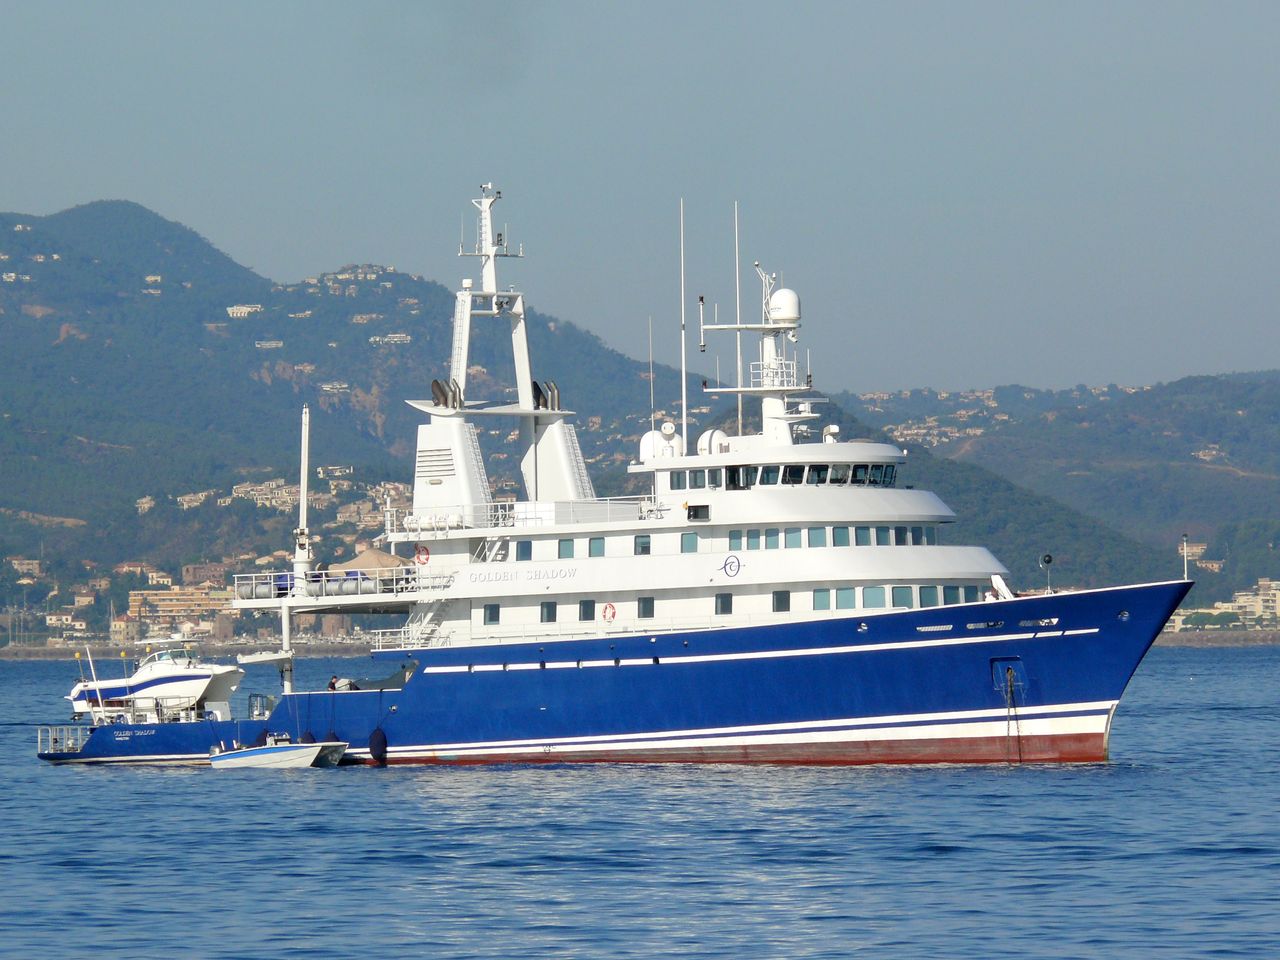 the dictator’s son wanted his yacht back. that’s when trouble started for two oilmen.